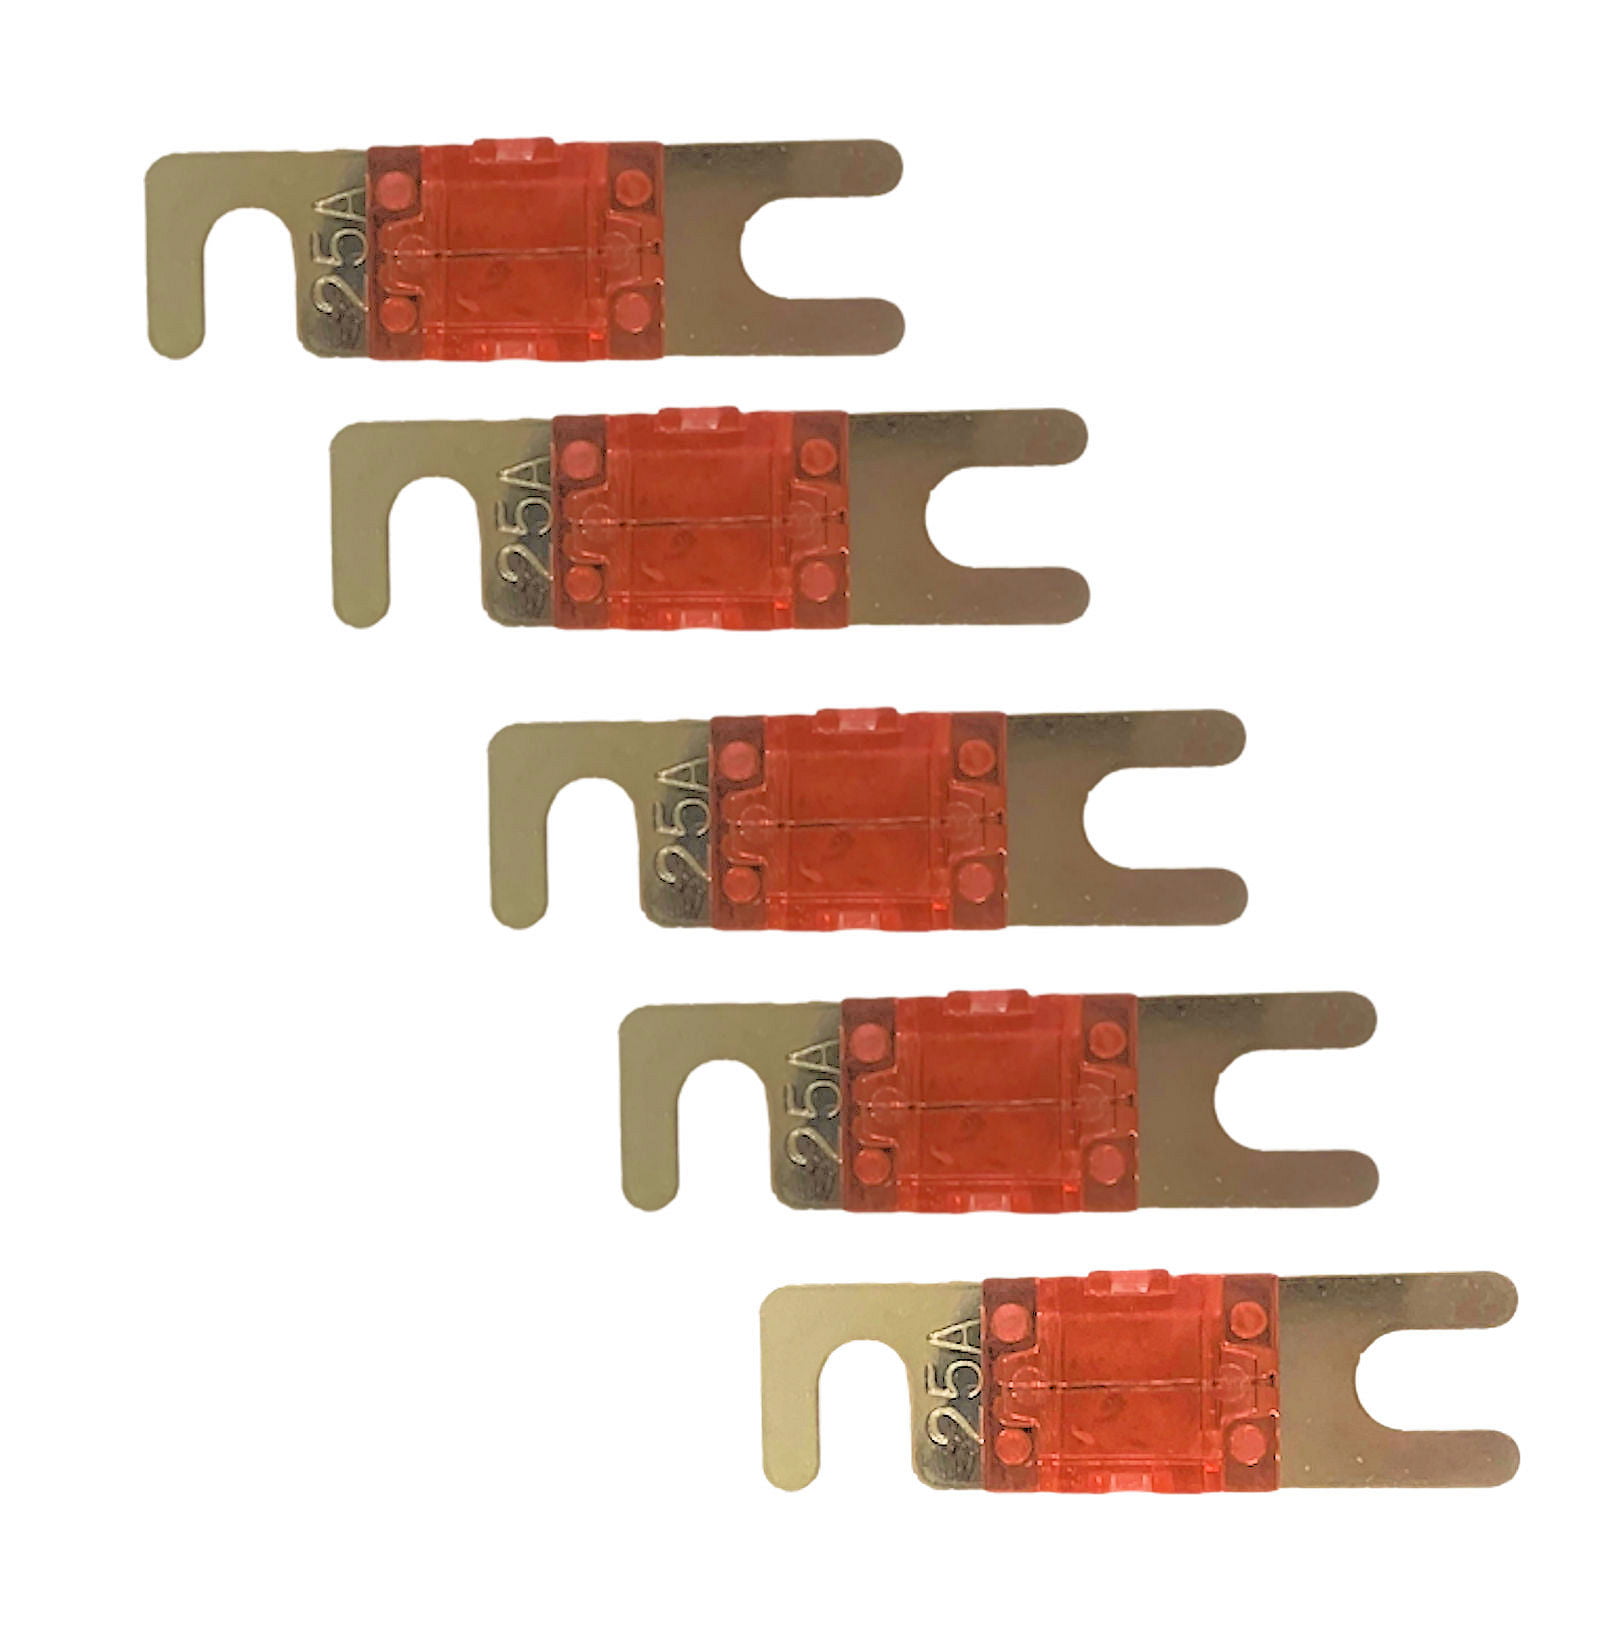 AUTOMOTIVE MINI BLADE AUTO FUSES 25 AMP NATURAL PACK OF 1000 